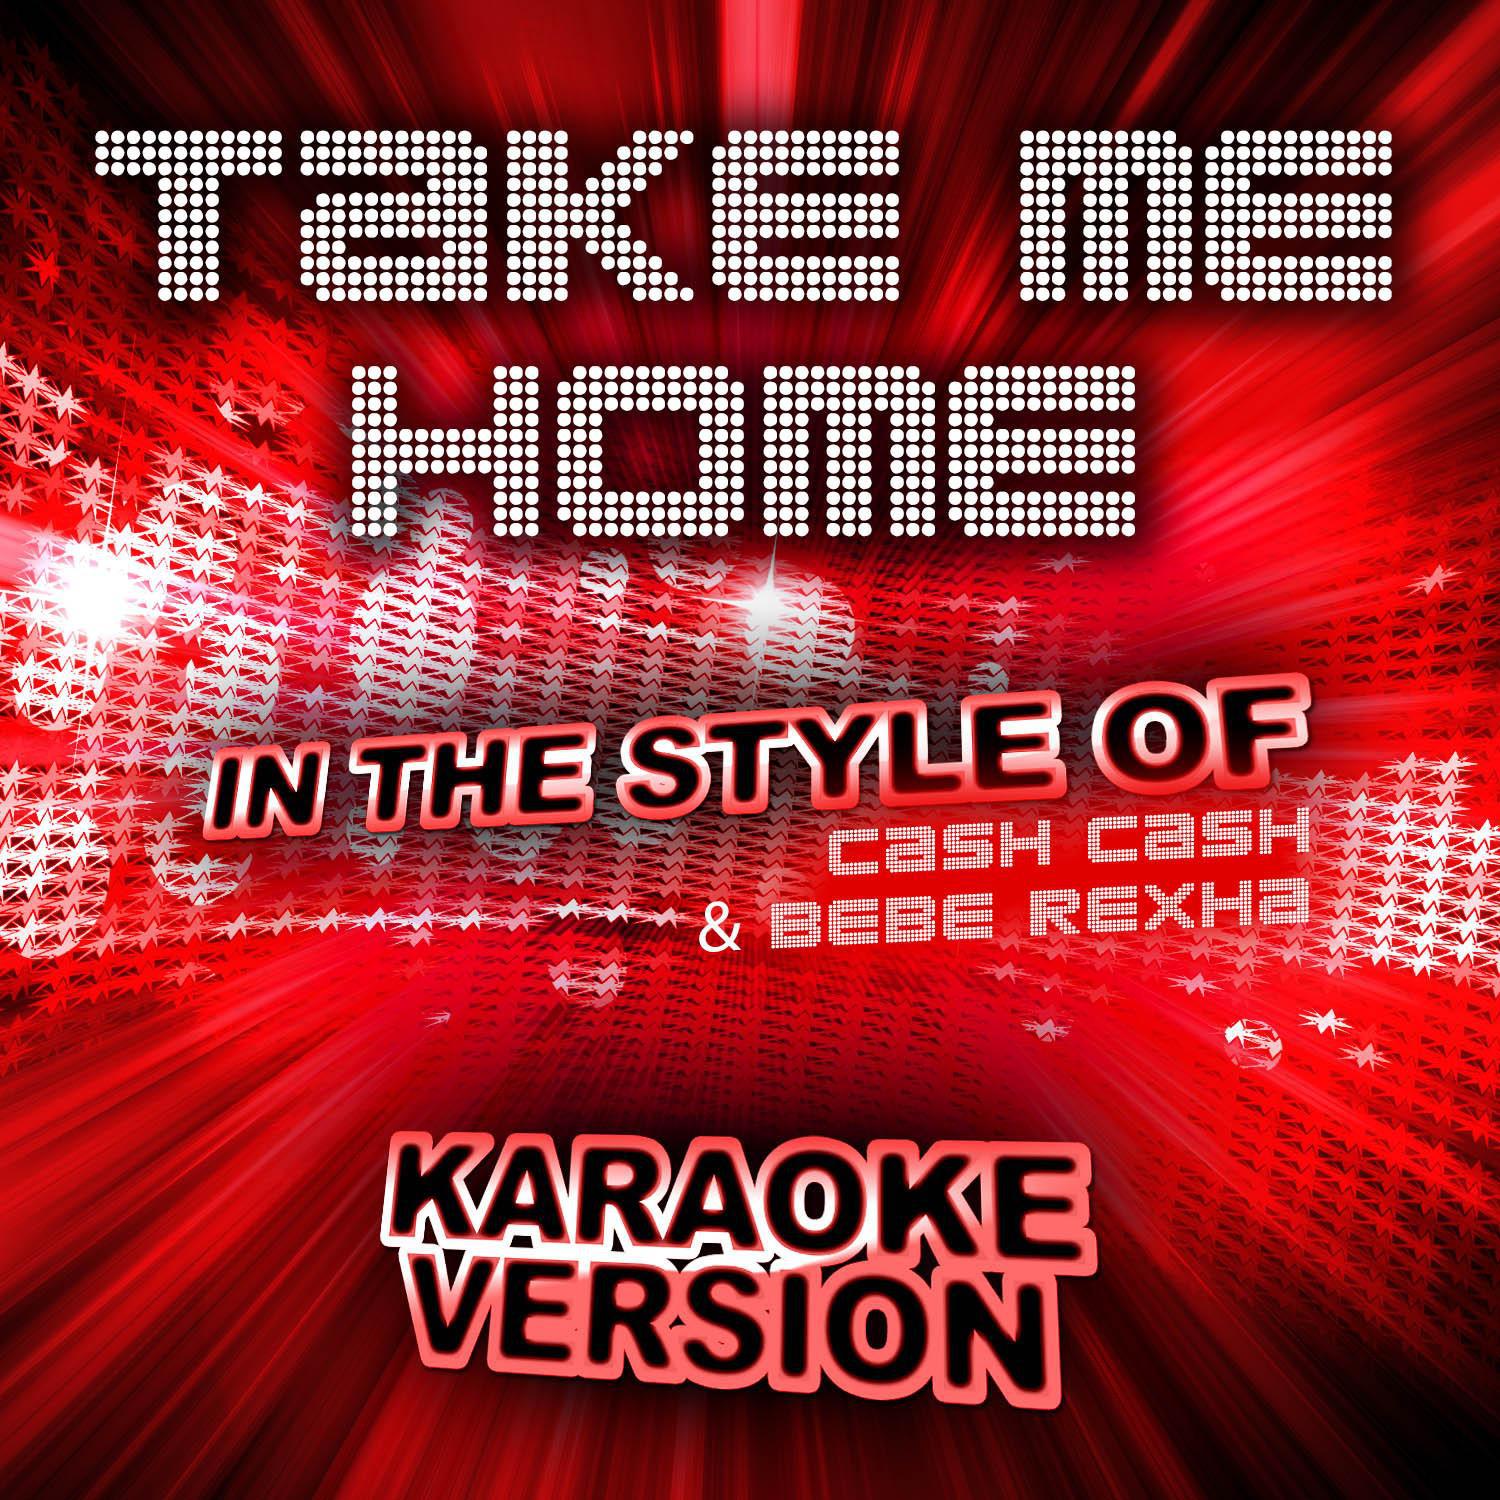 Take Me Home (In the Style of Cash Cash and Bebe Rexha) [Karaoke Version]